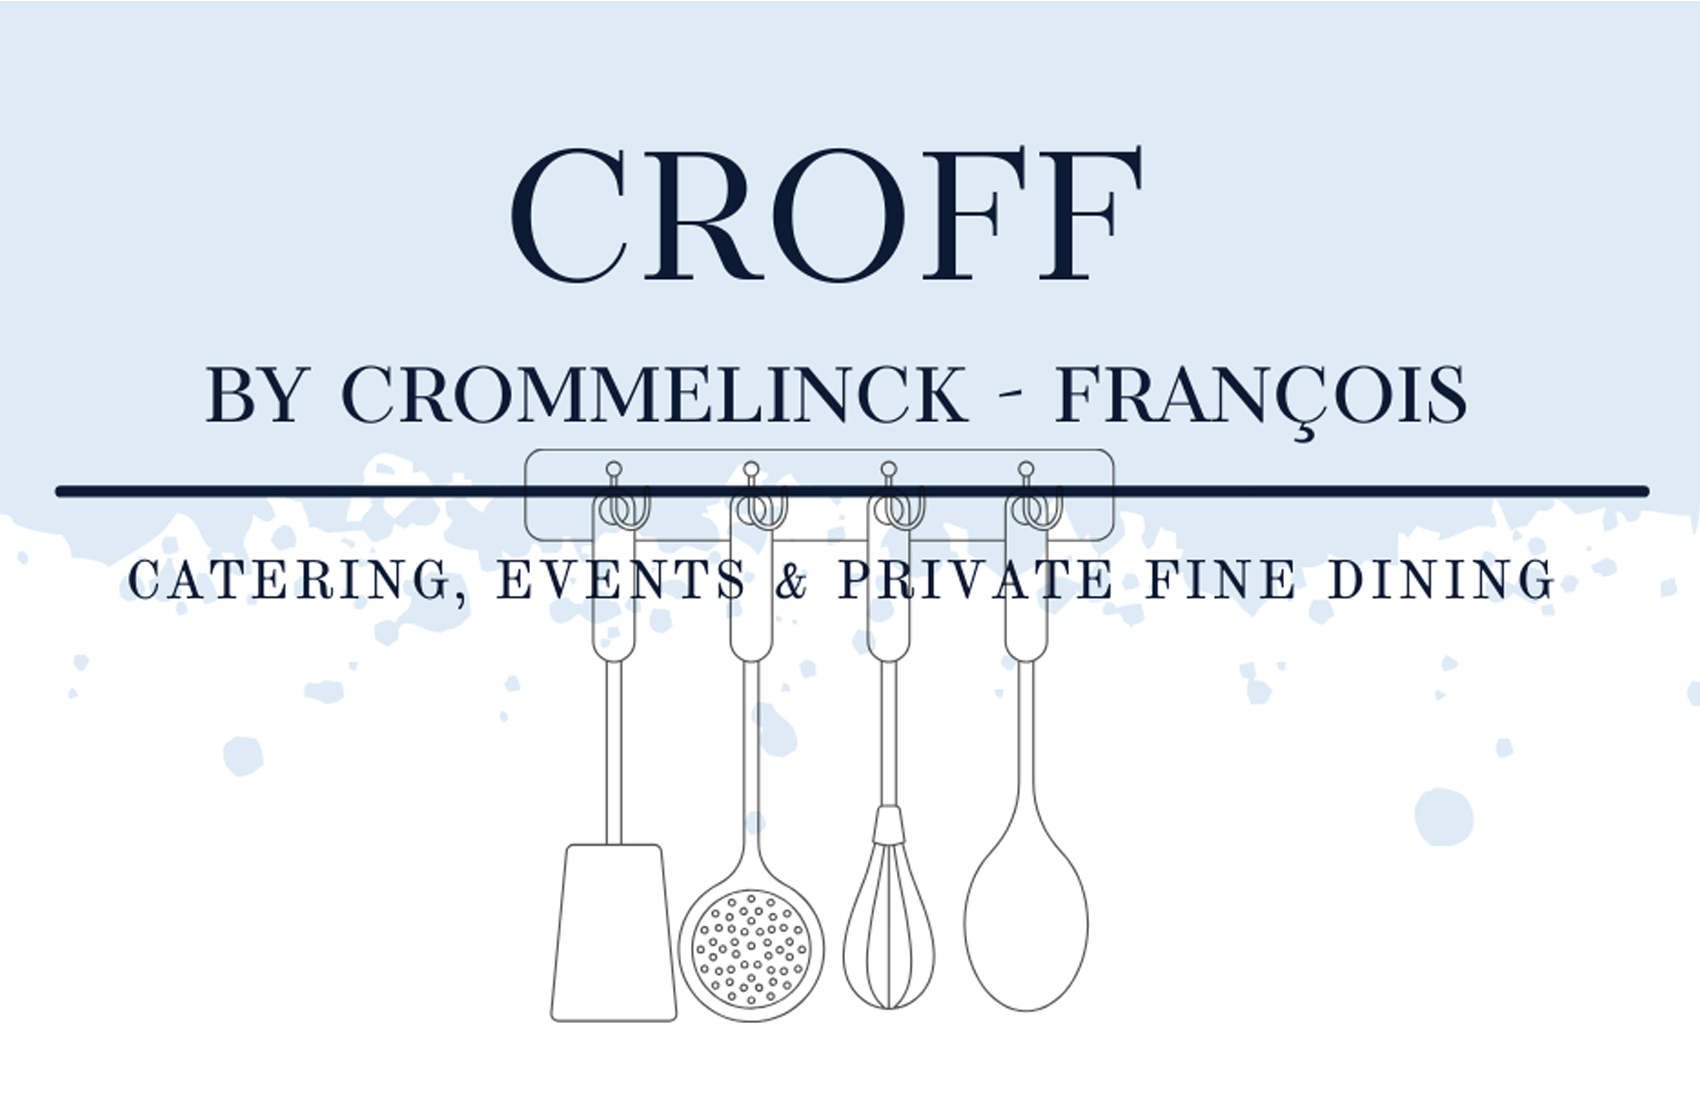 CROFF catering by Crommelinck & Francois